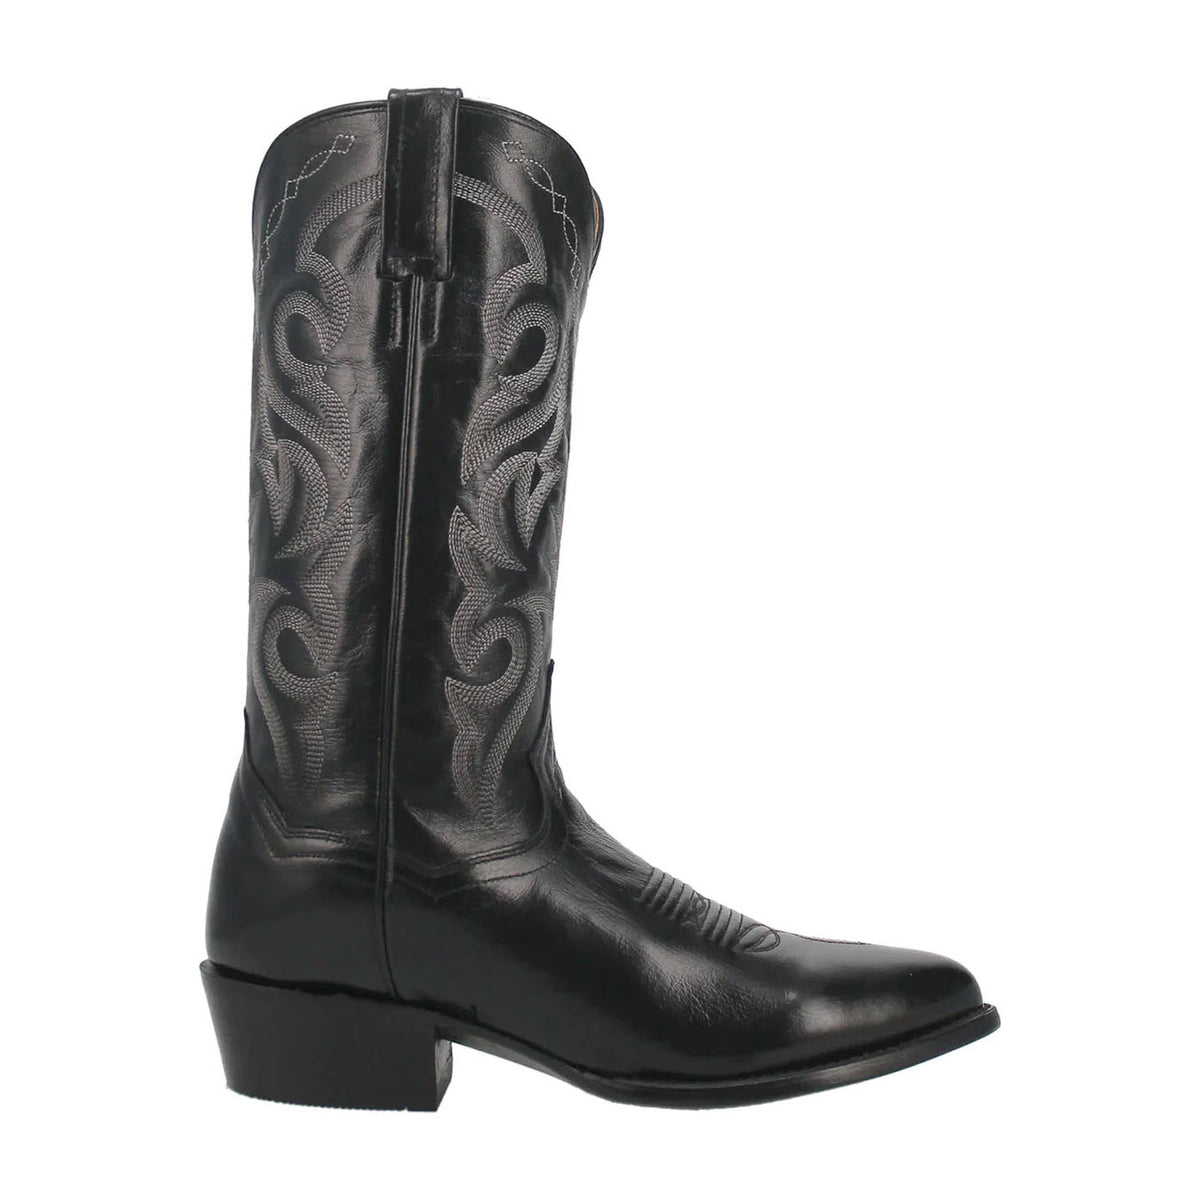 A single black leather Dan Post Milwaukee 13 inch Western boot with traditional western embroidery and a cowboy heel, isolated on a white background.